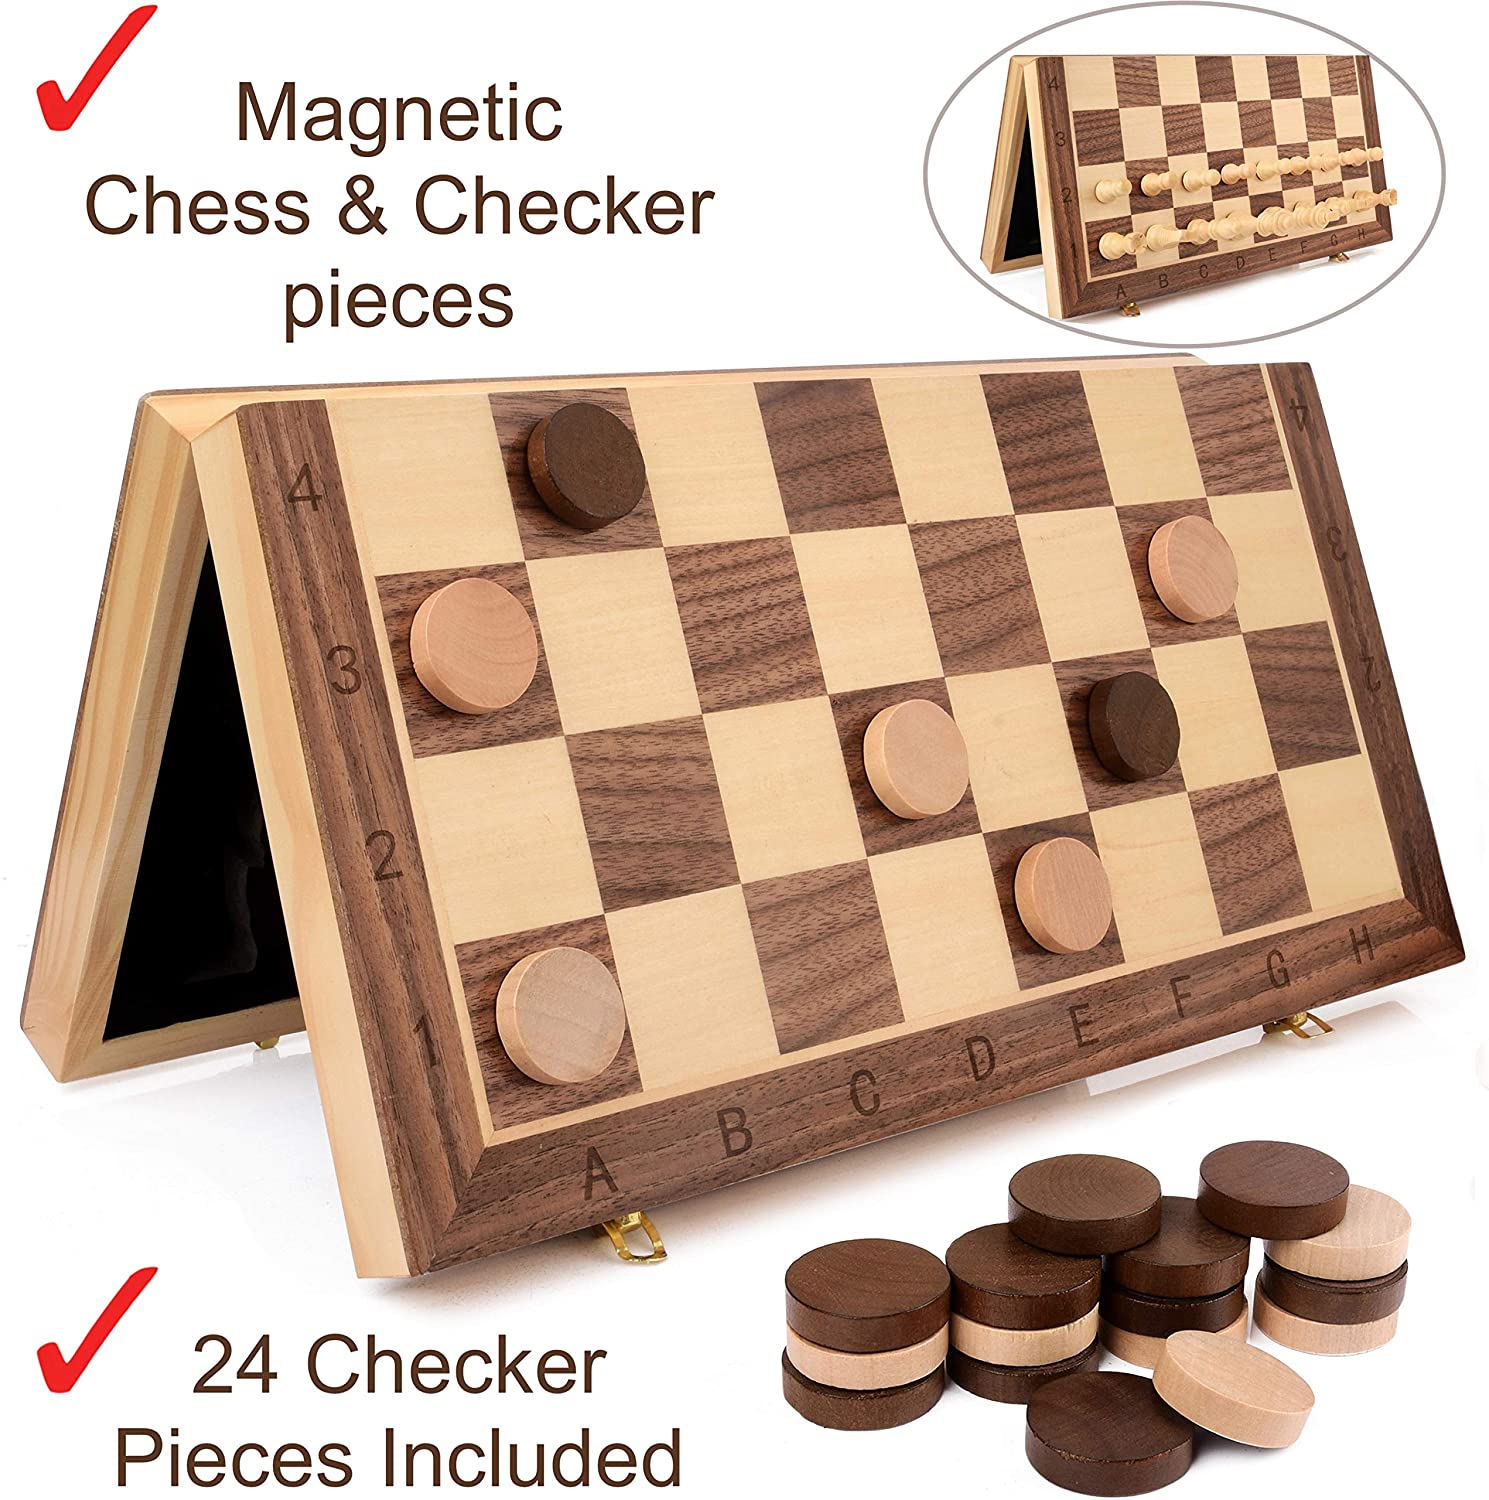  Vahome Magnetic Chess Board Set for Adults & Kids, 15